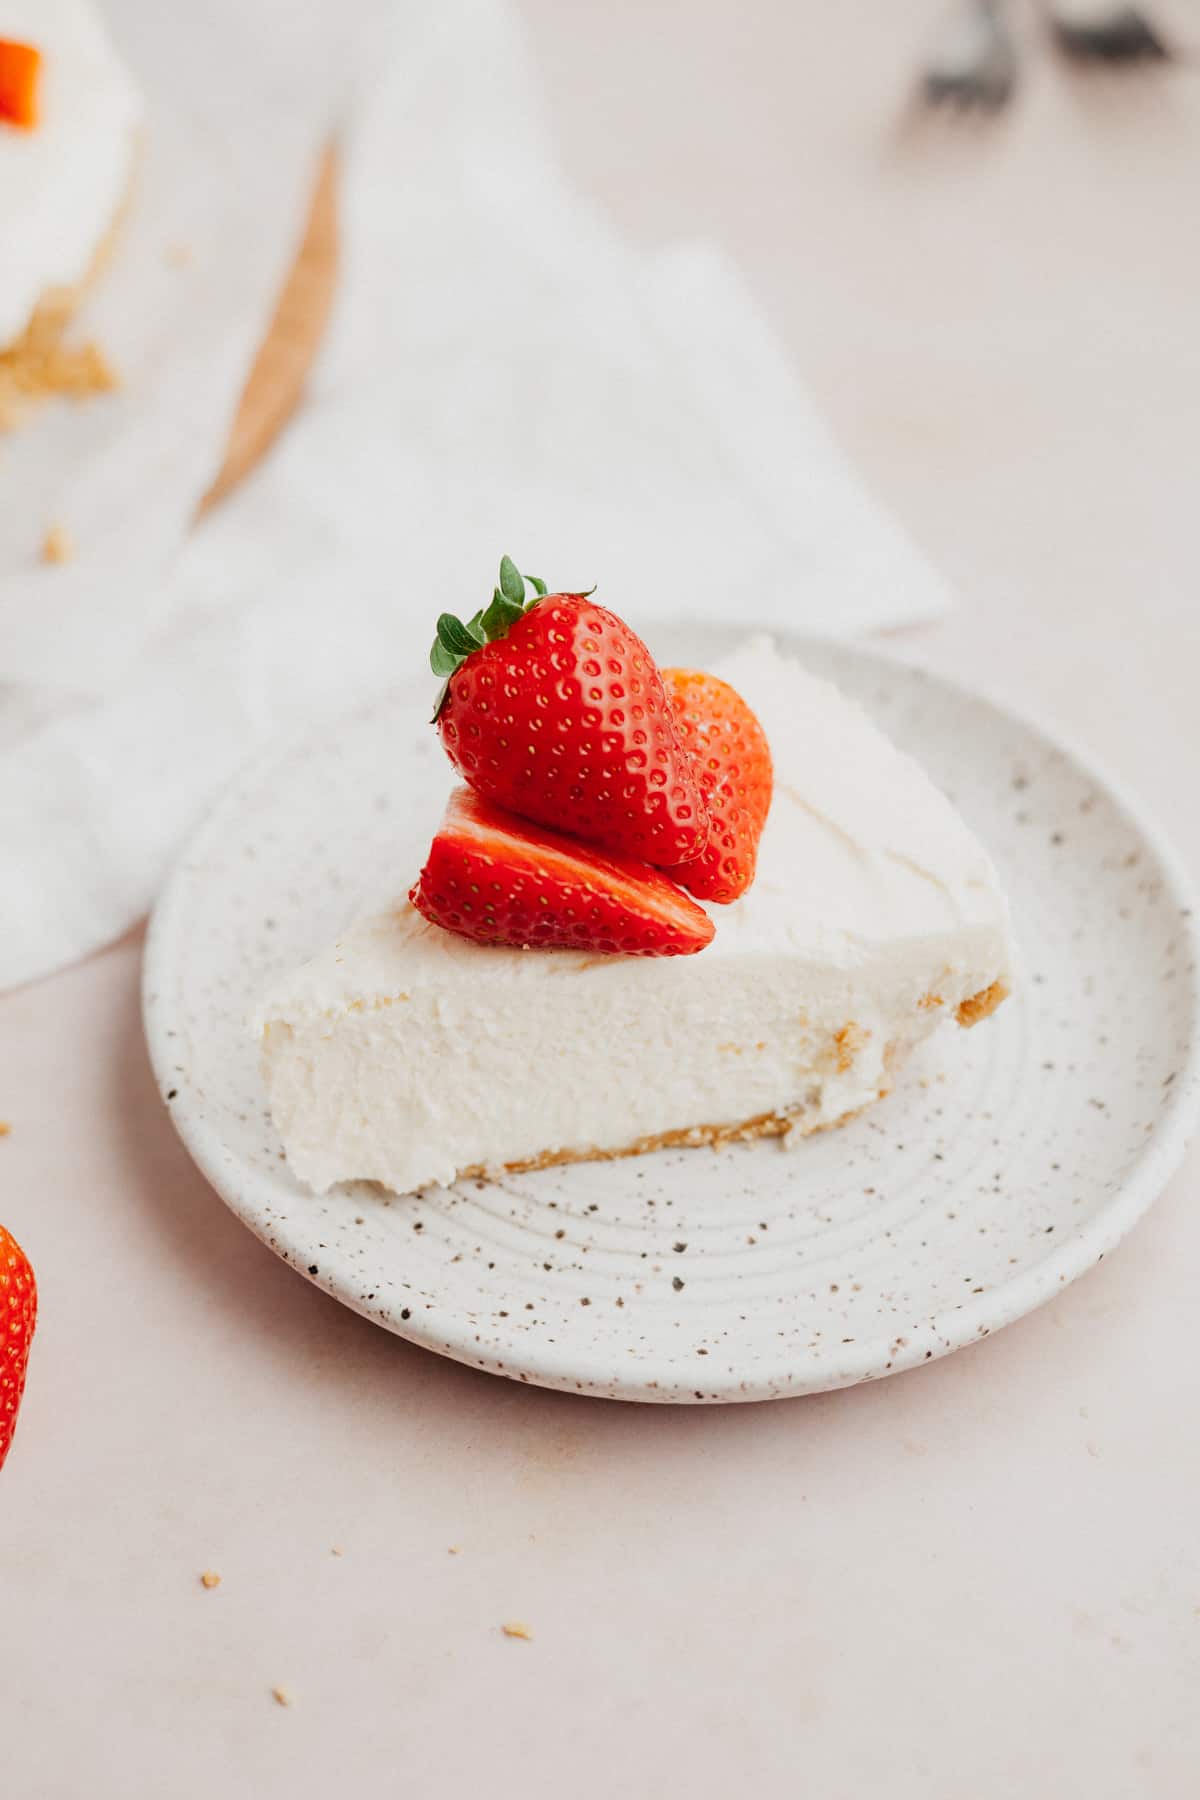 A slice of mascarpone cheesecake topped with sliced strawberries on a small plate.